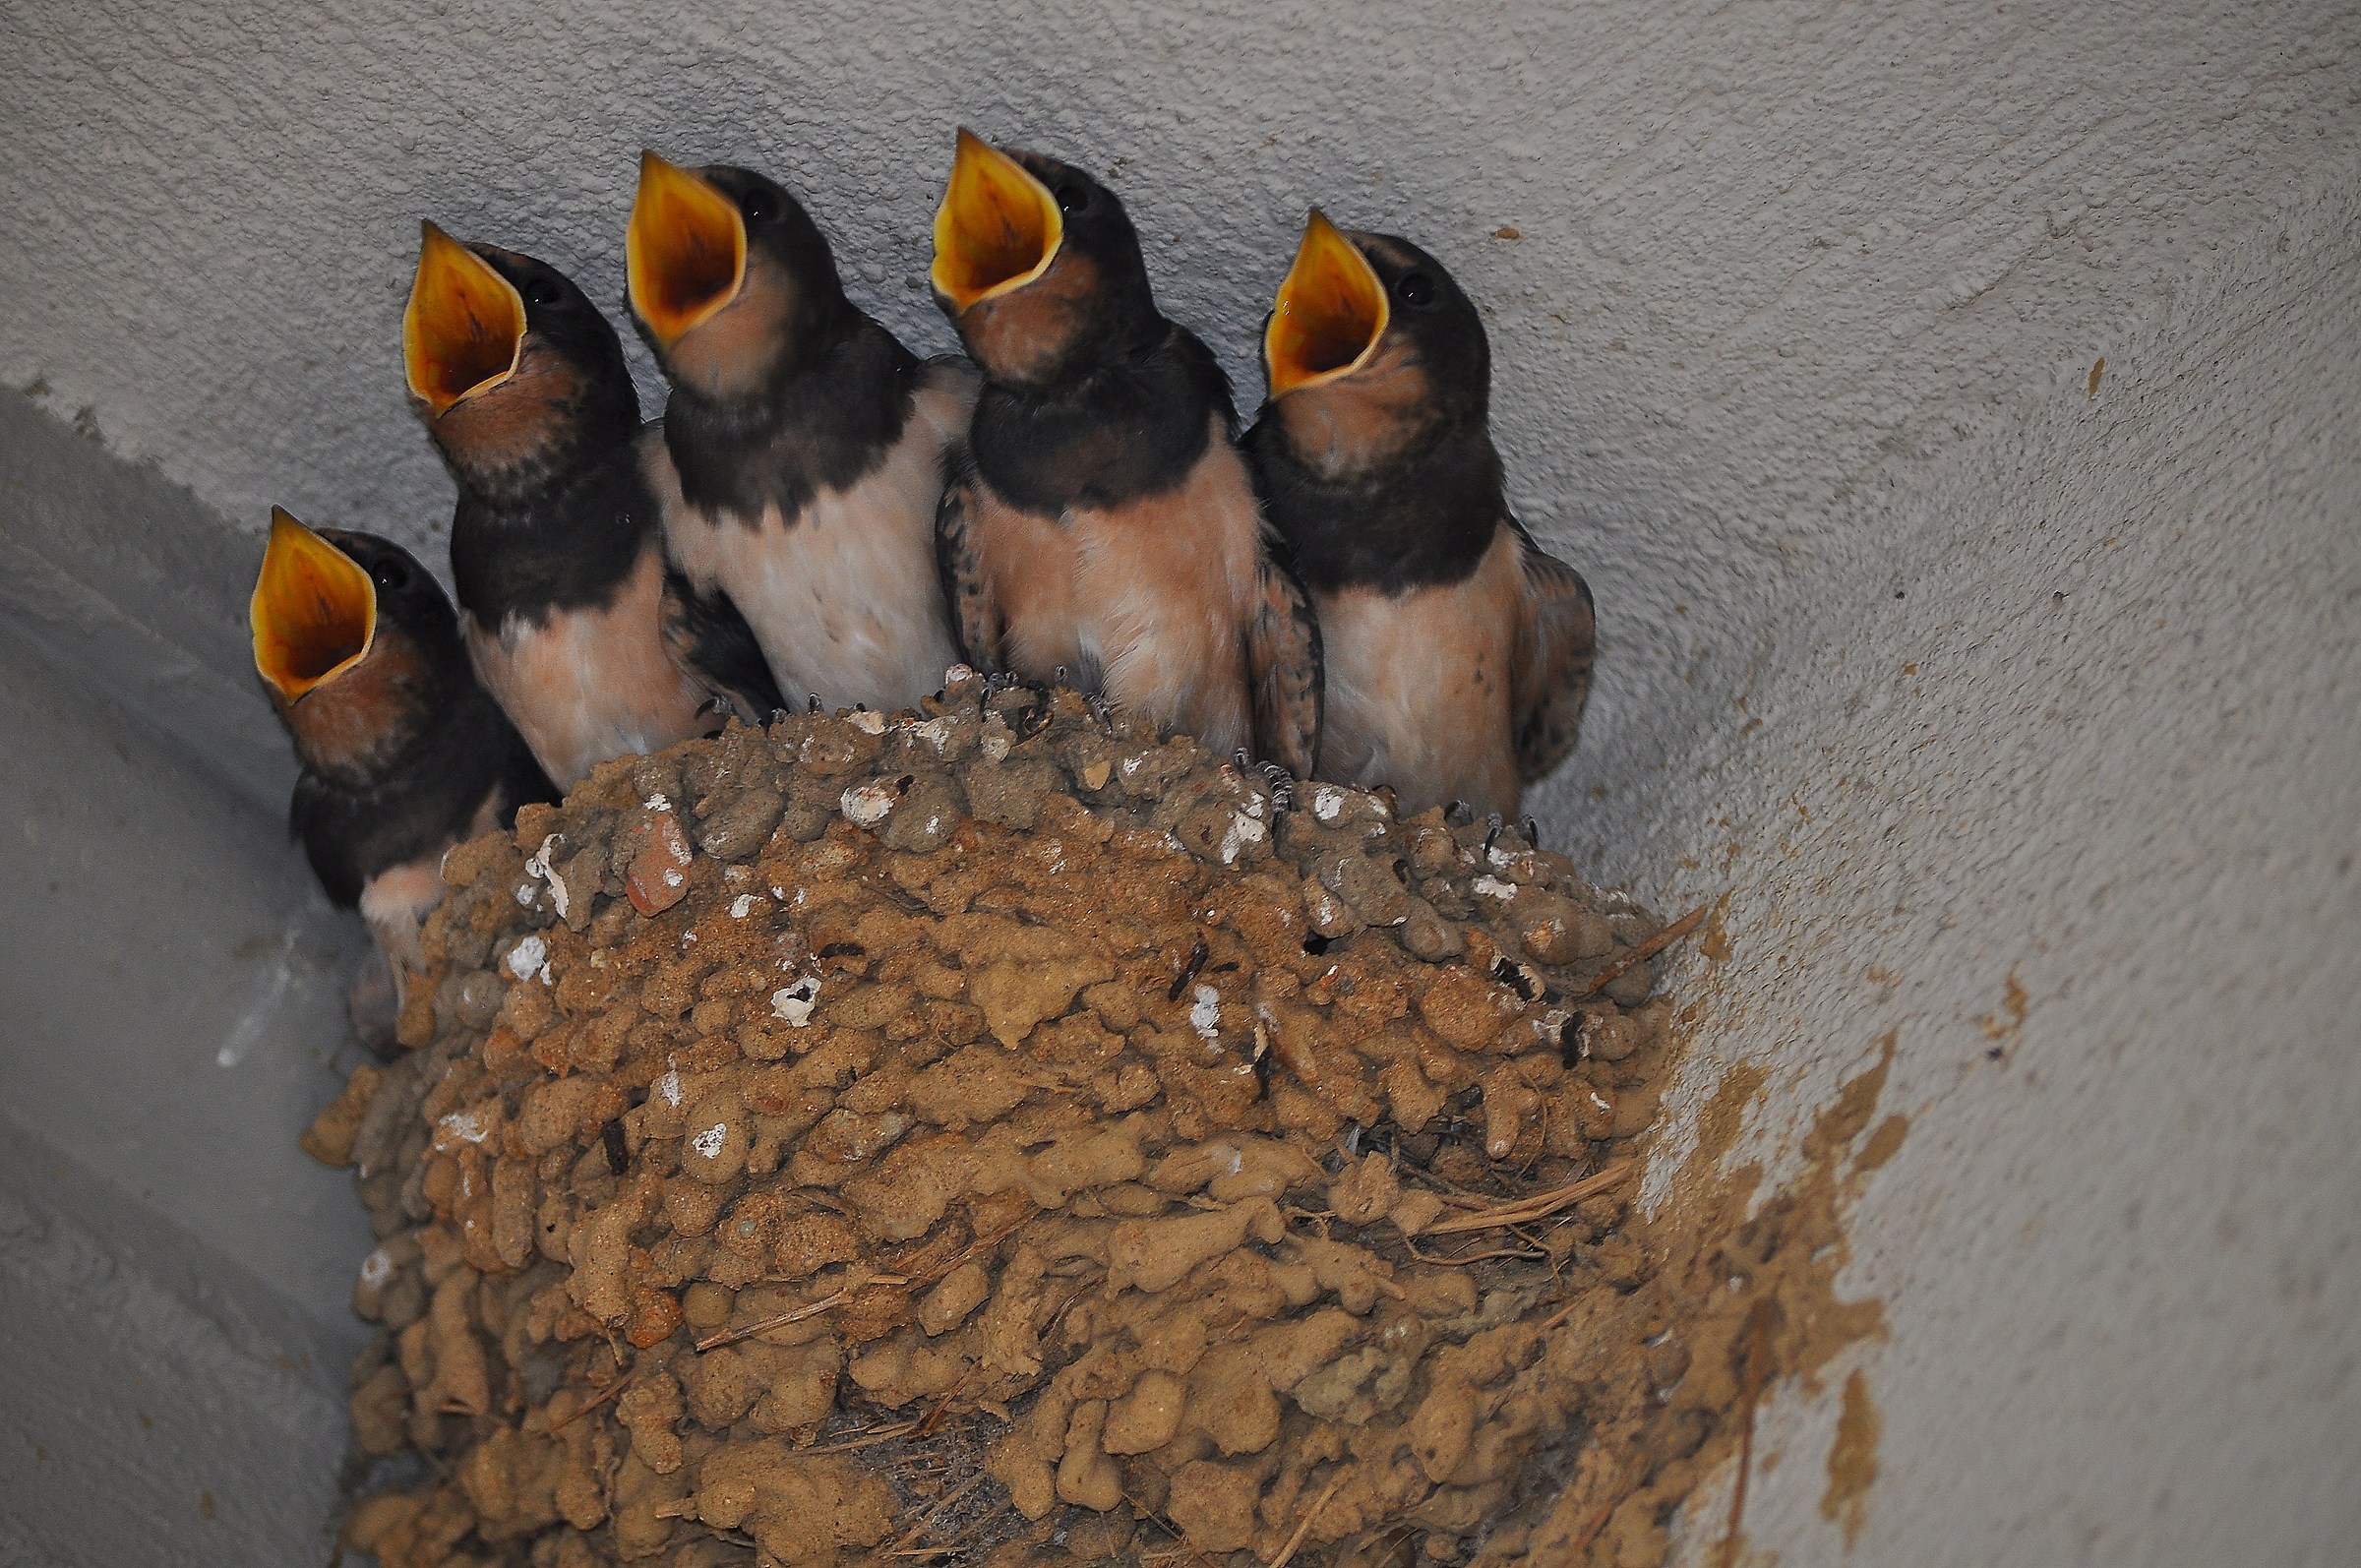 The swallows are hungry...